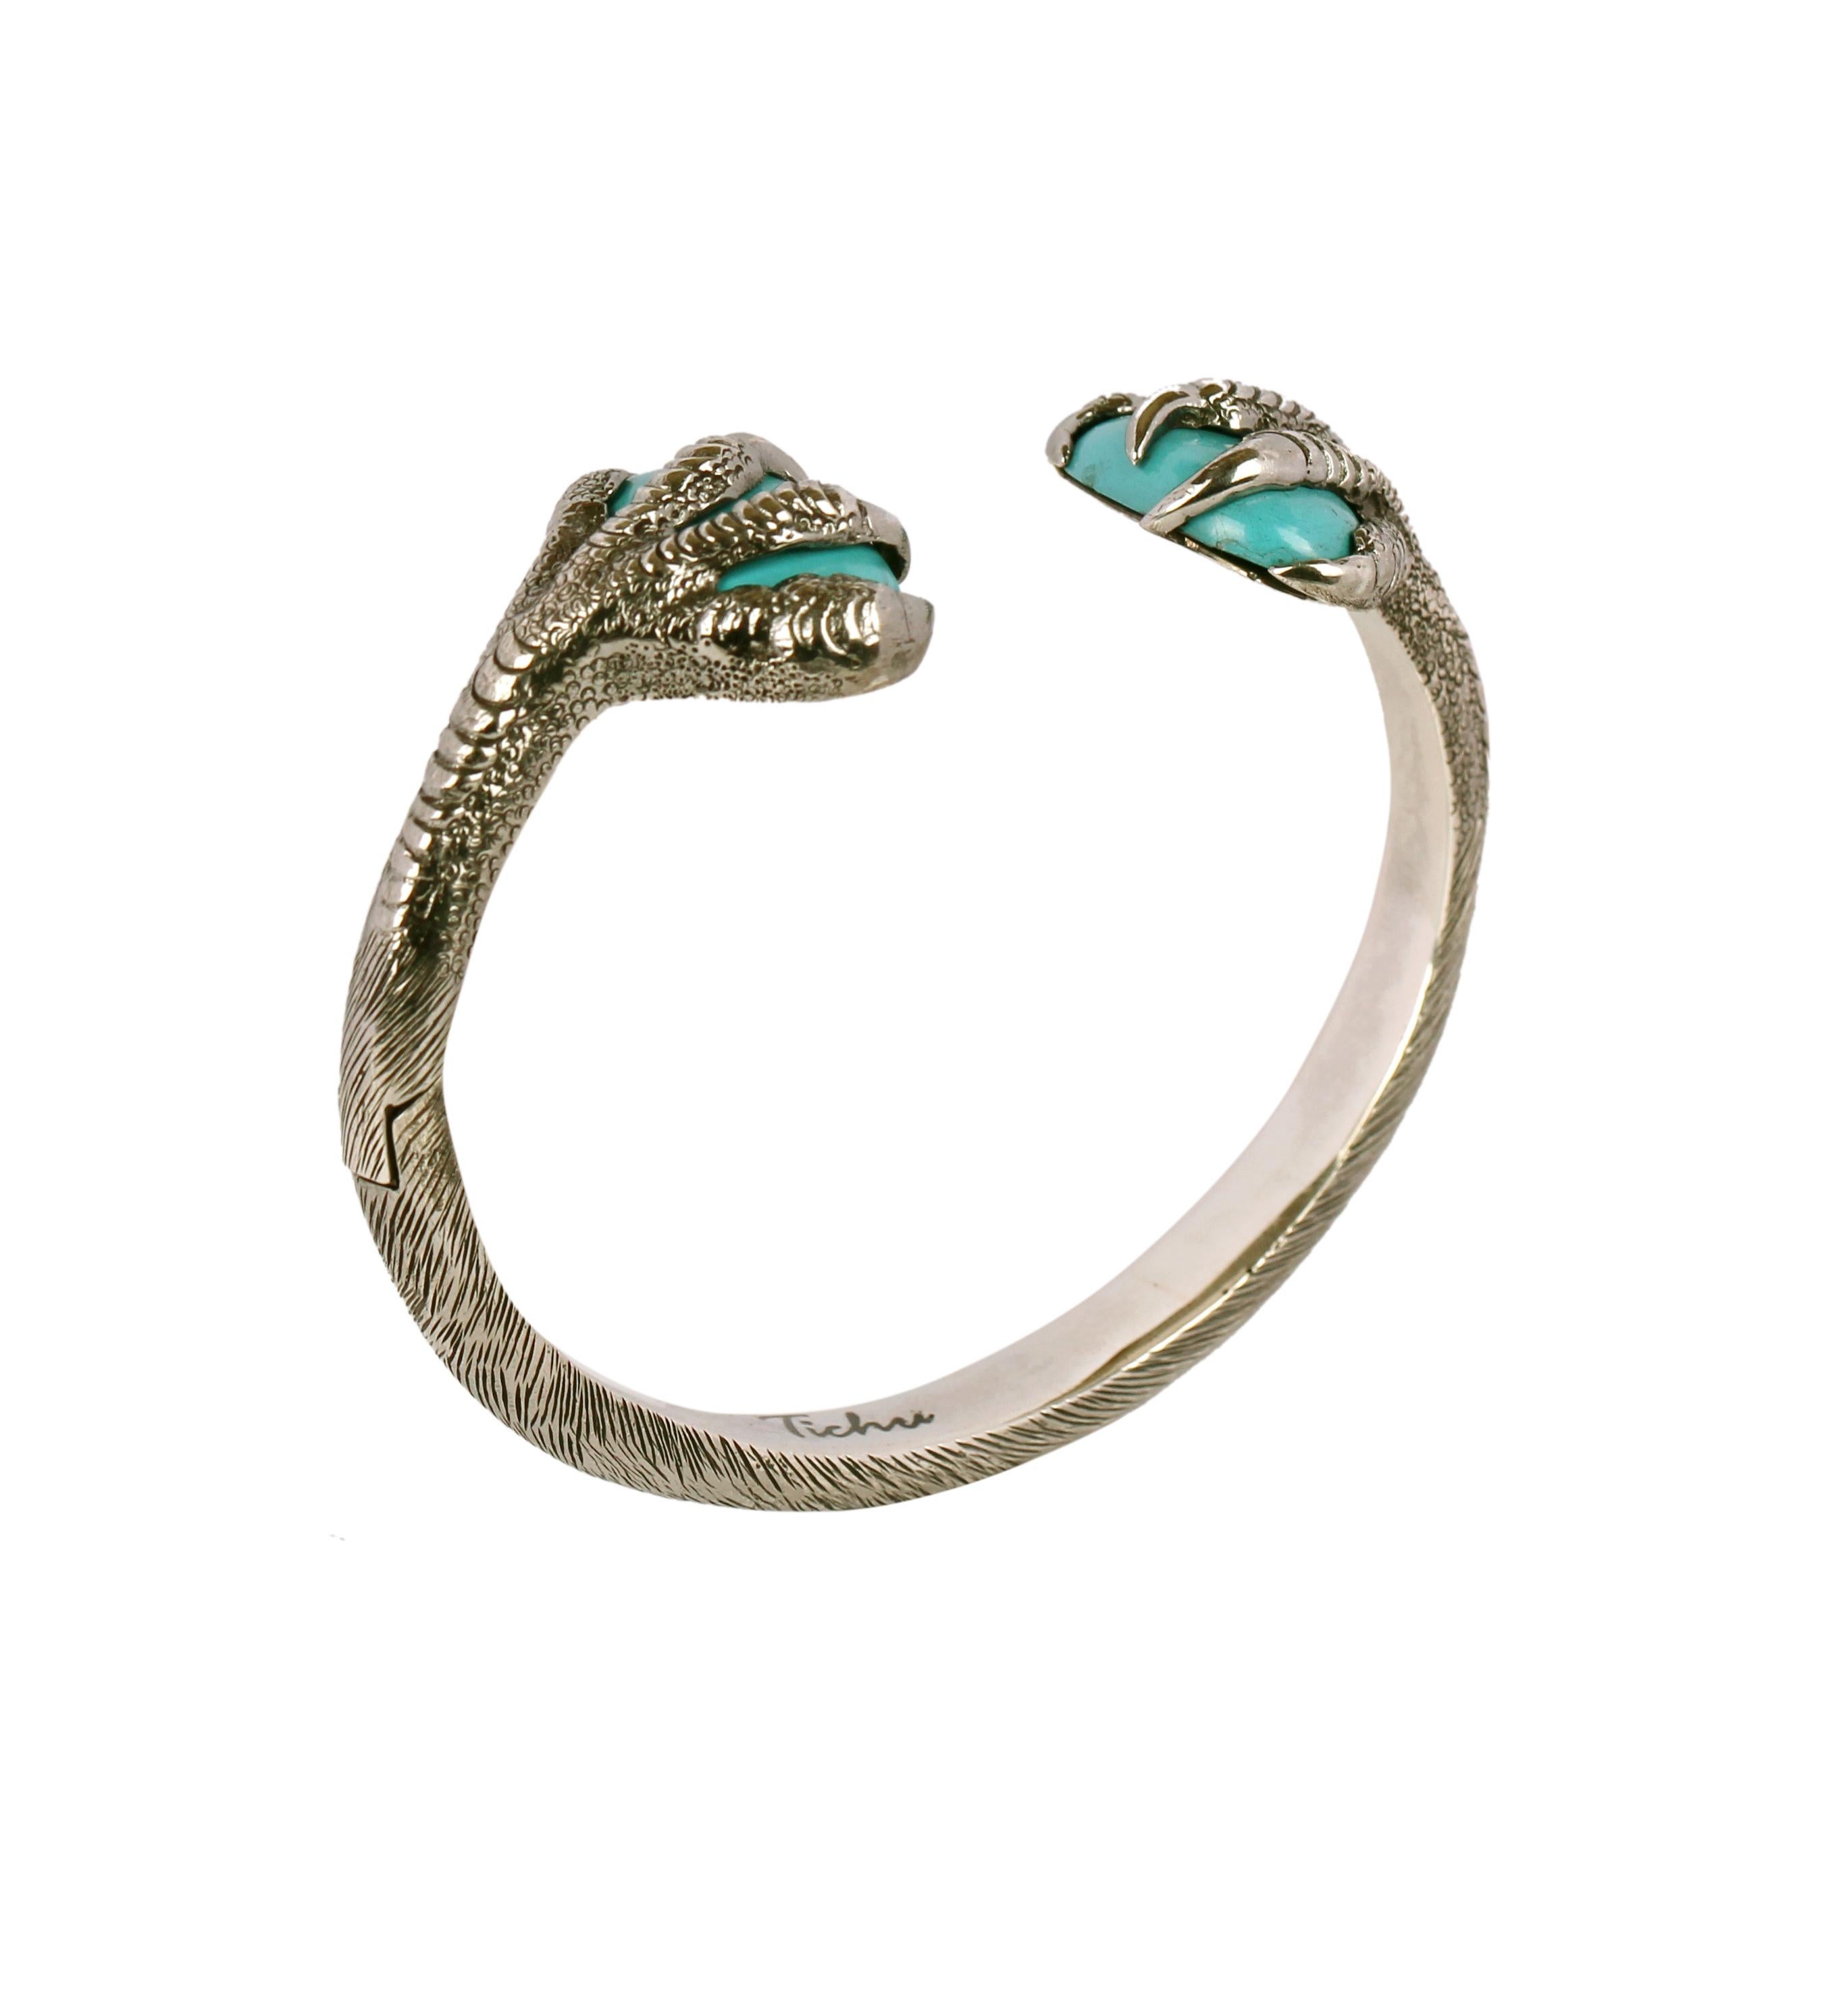 Cabochon Tichu Turquoise Eagle Claw Cuff in Sterling Sliver and Crystal Quartz 'Size S' For Sale